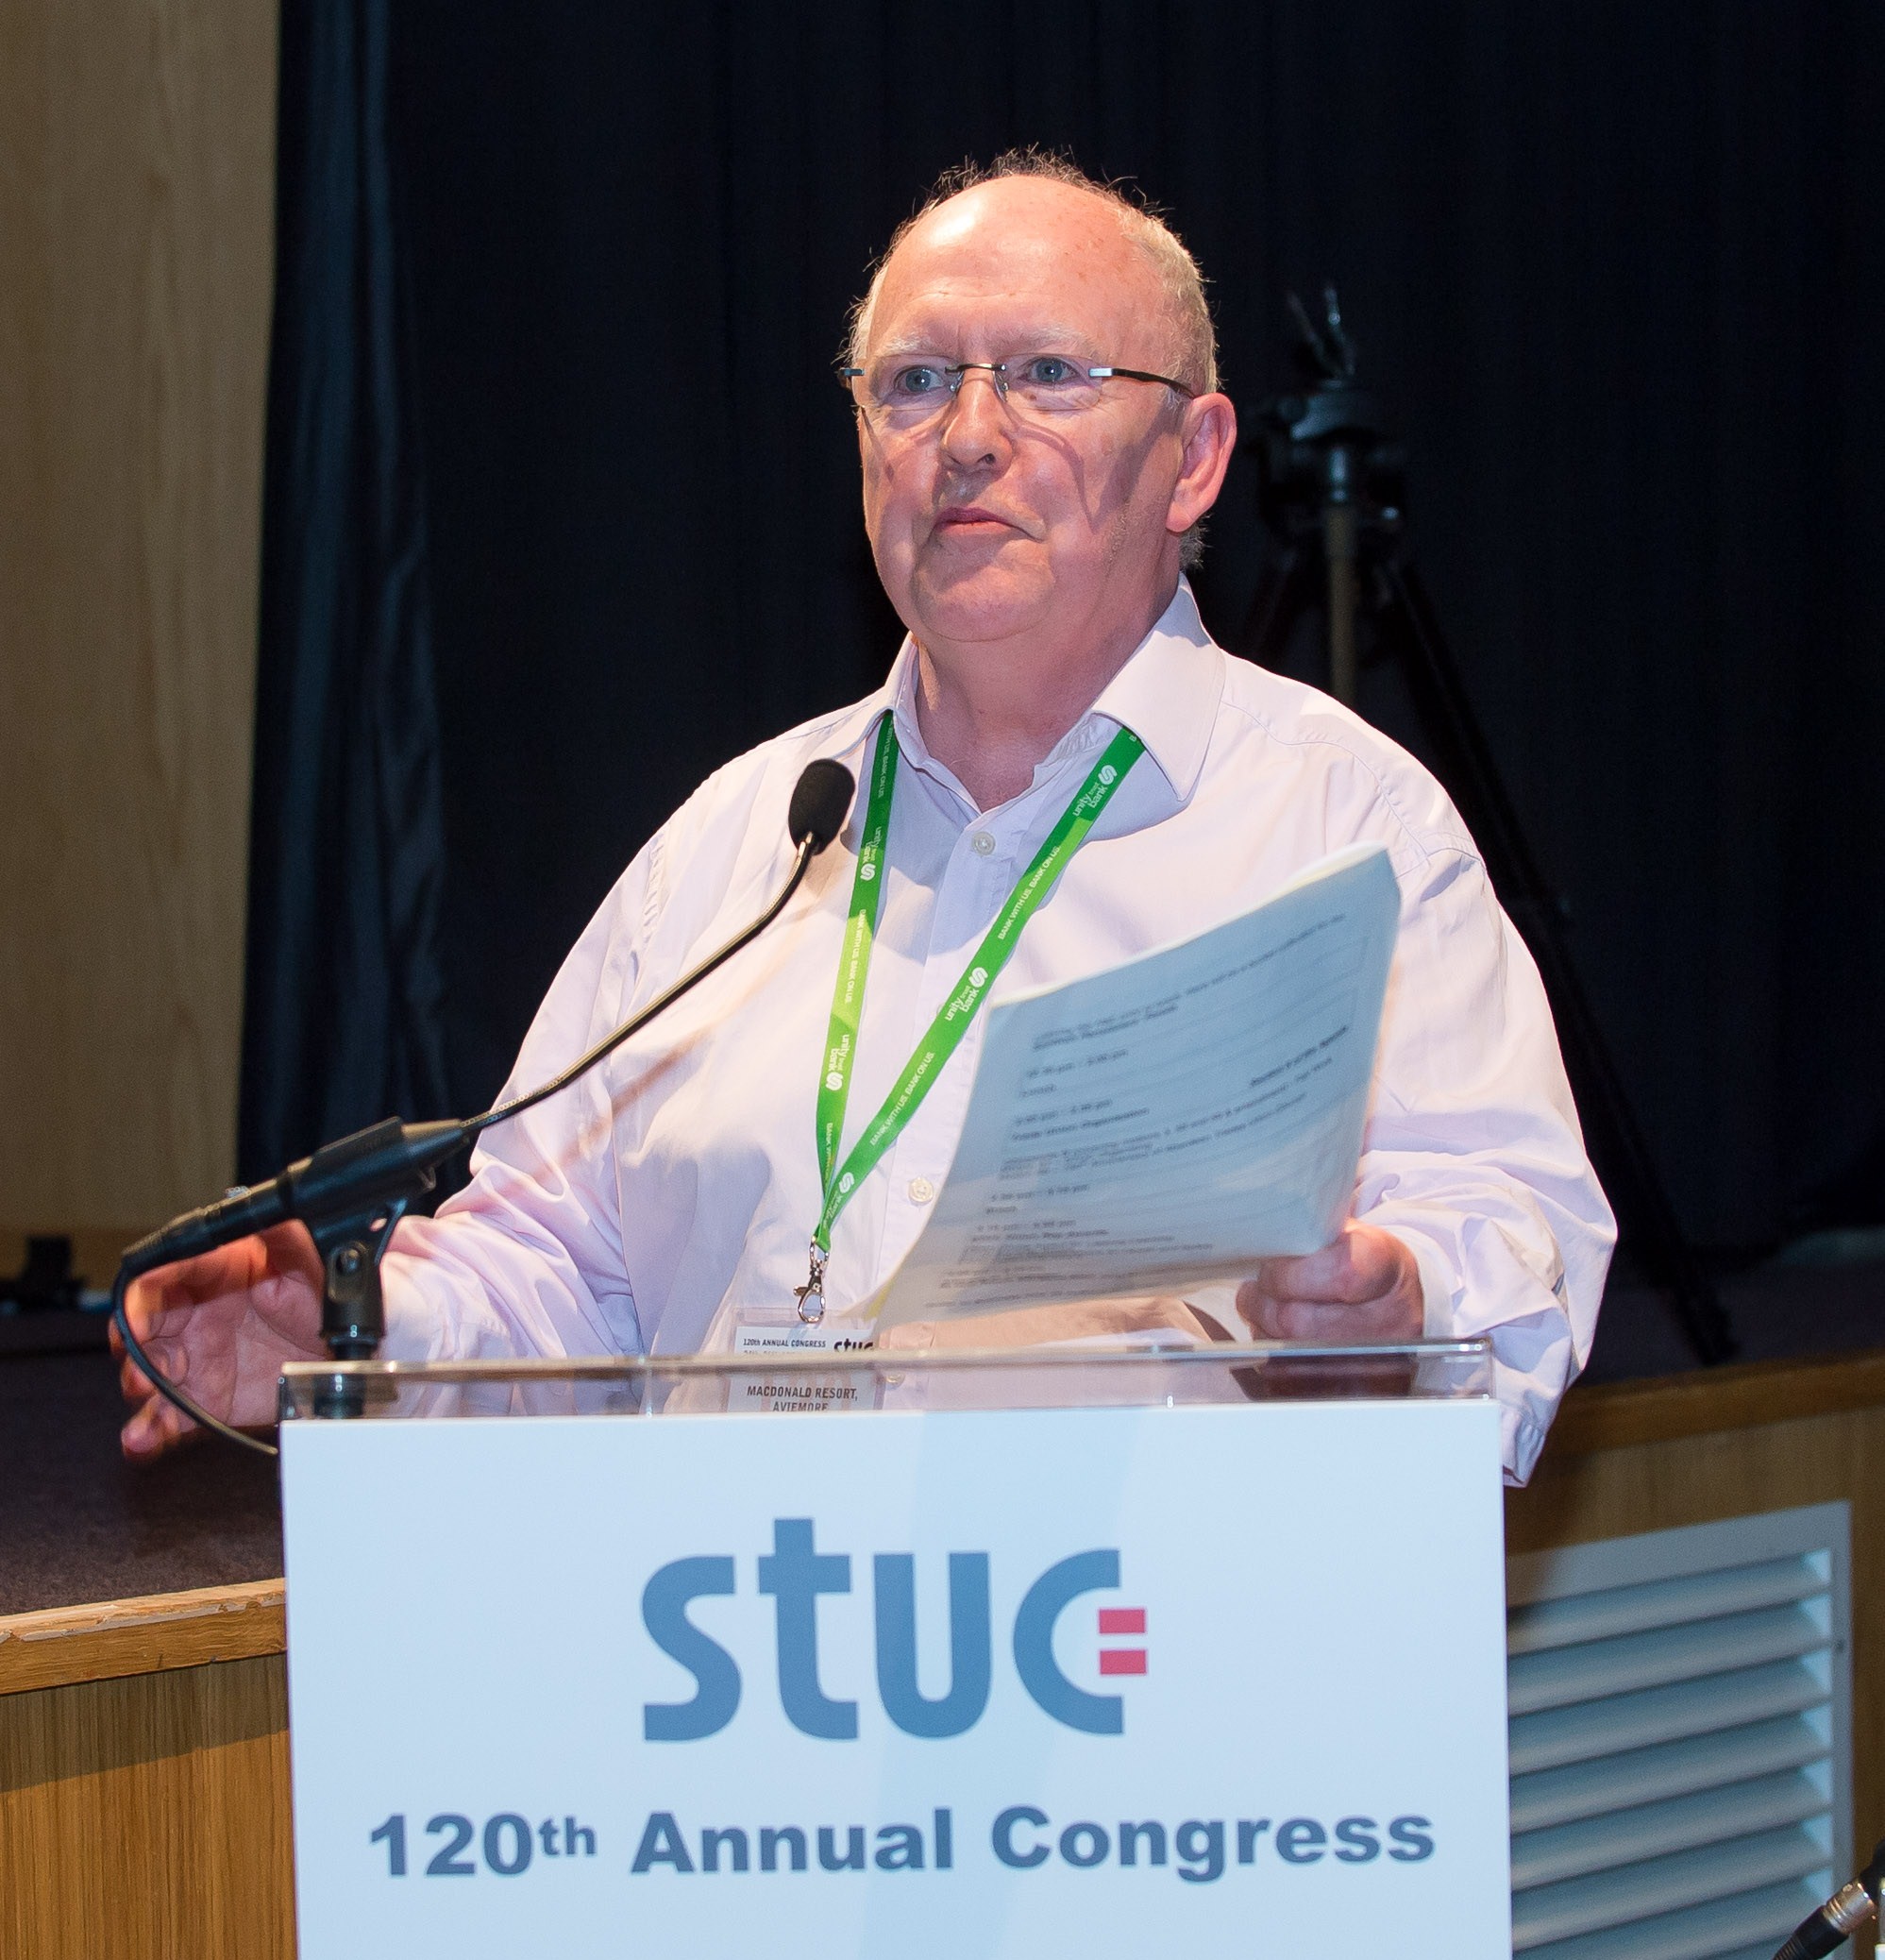 As part of the Musicians' Union delegation, Eddie speaks at the annual STUC conference